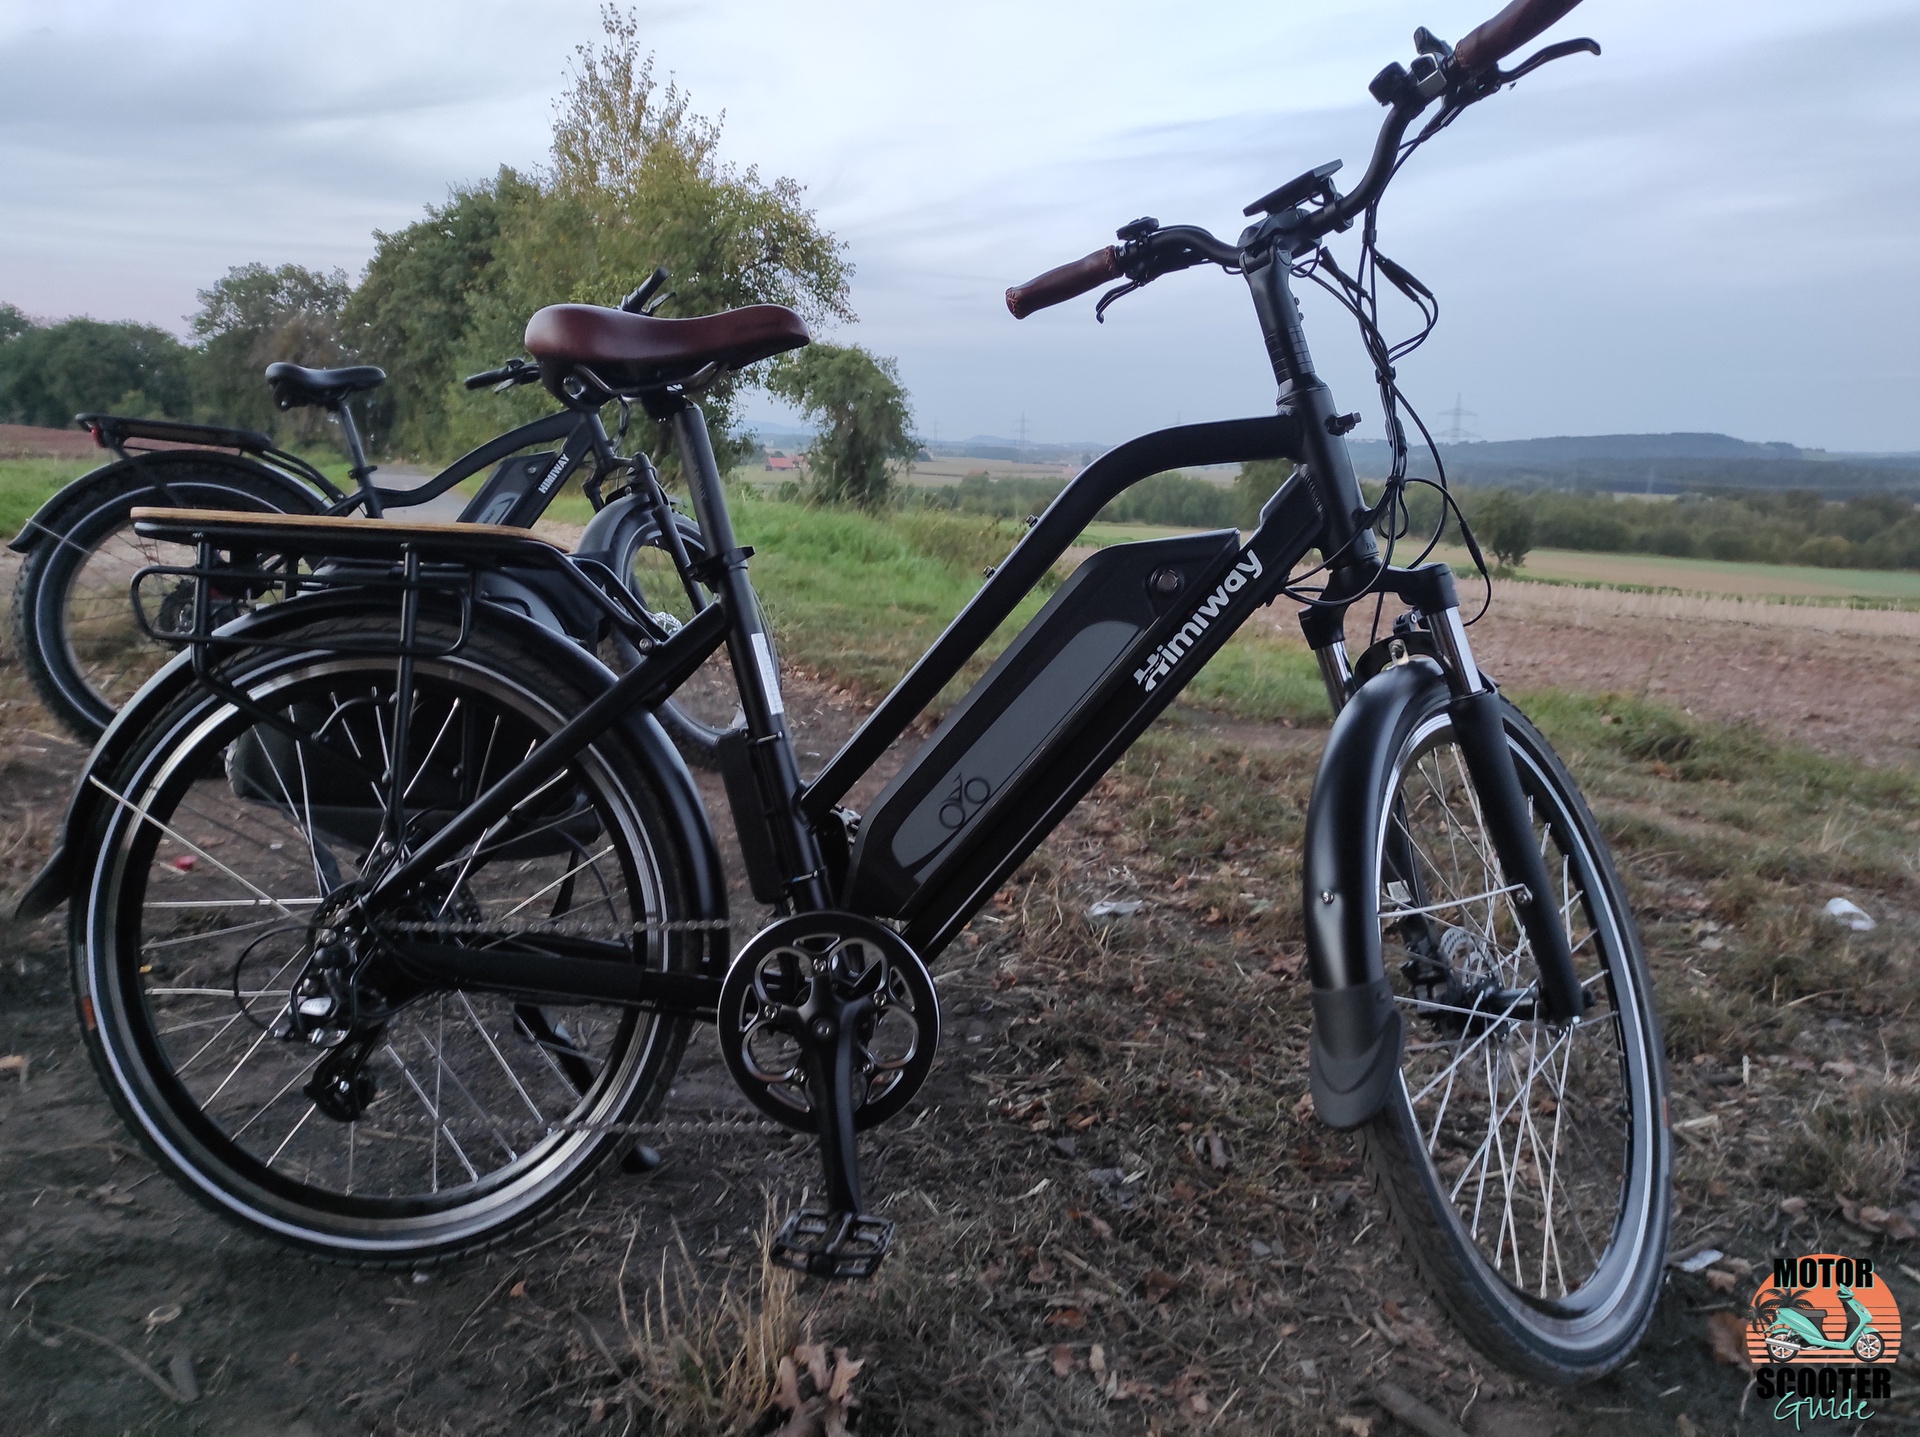  Himiway City Pedelec and Himiway Cruiser